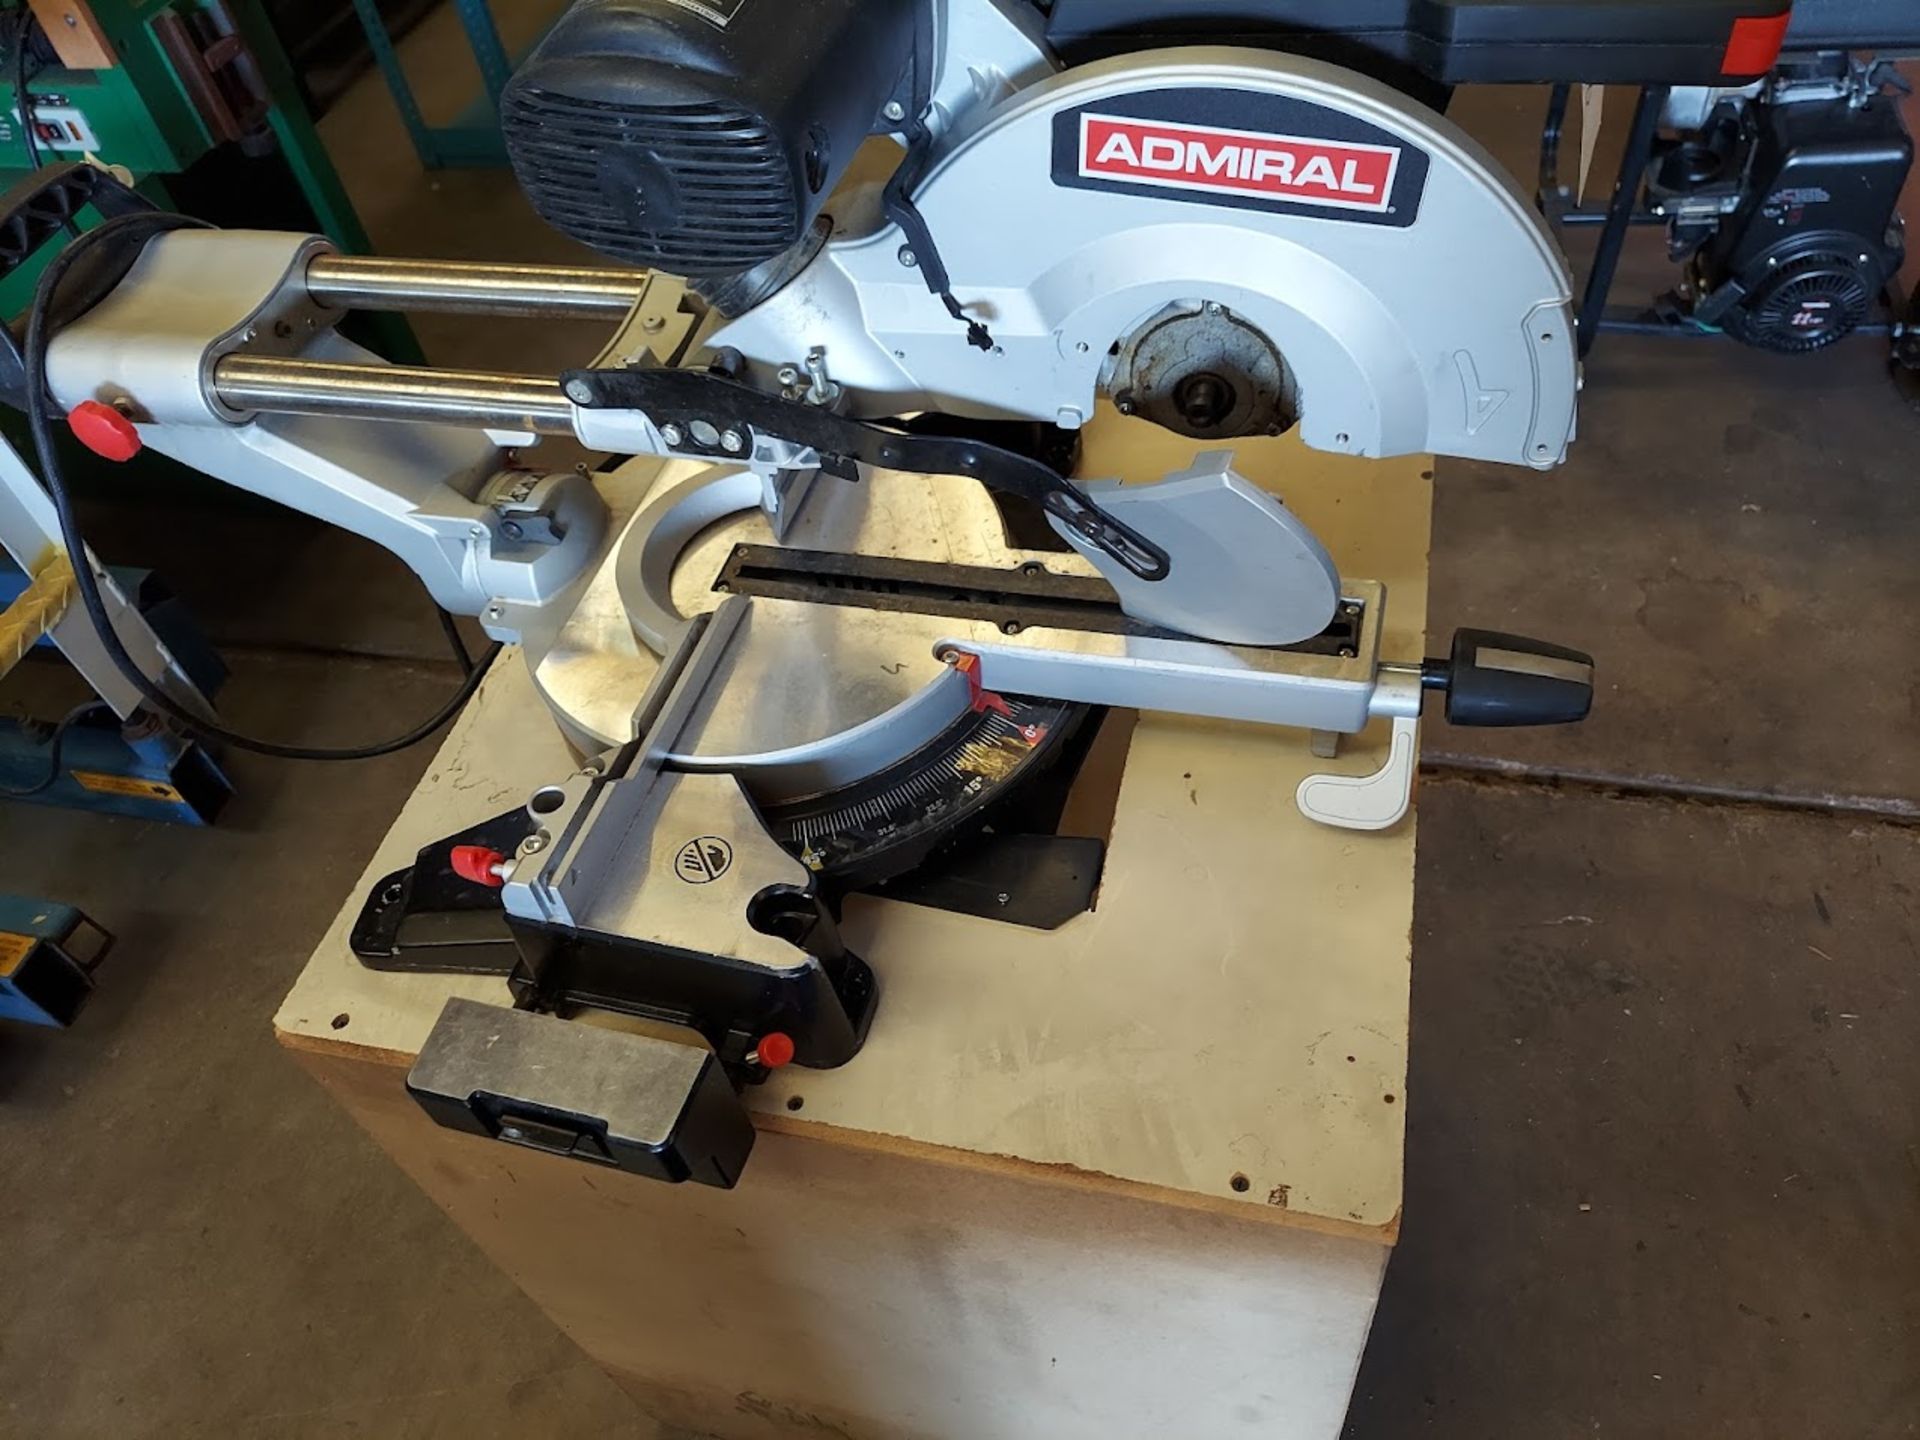 Admiral 12" Dual Bevel Sliding Compound Miter Saw with Cabinet - Image 2 of 3